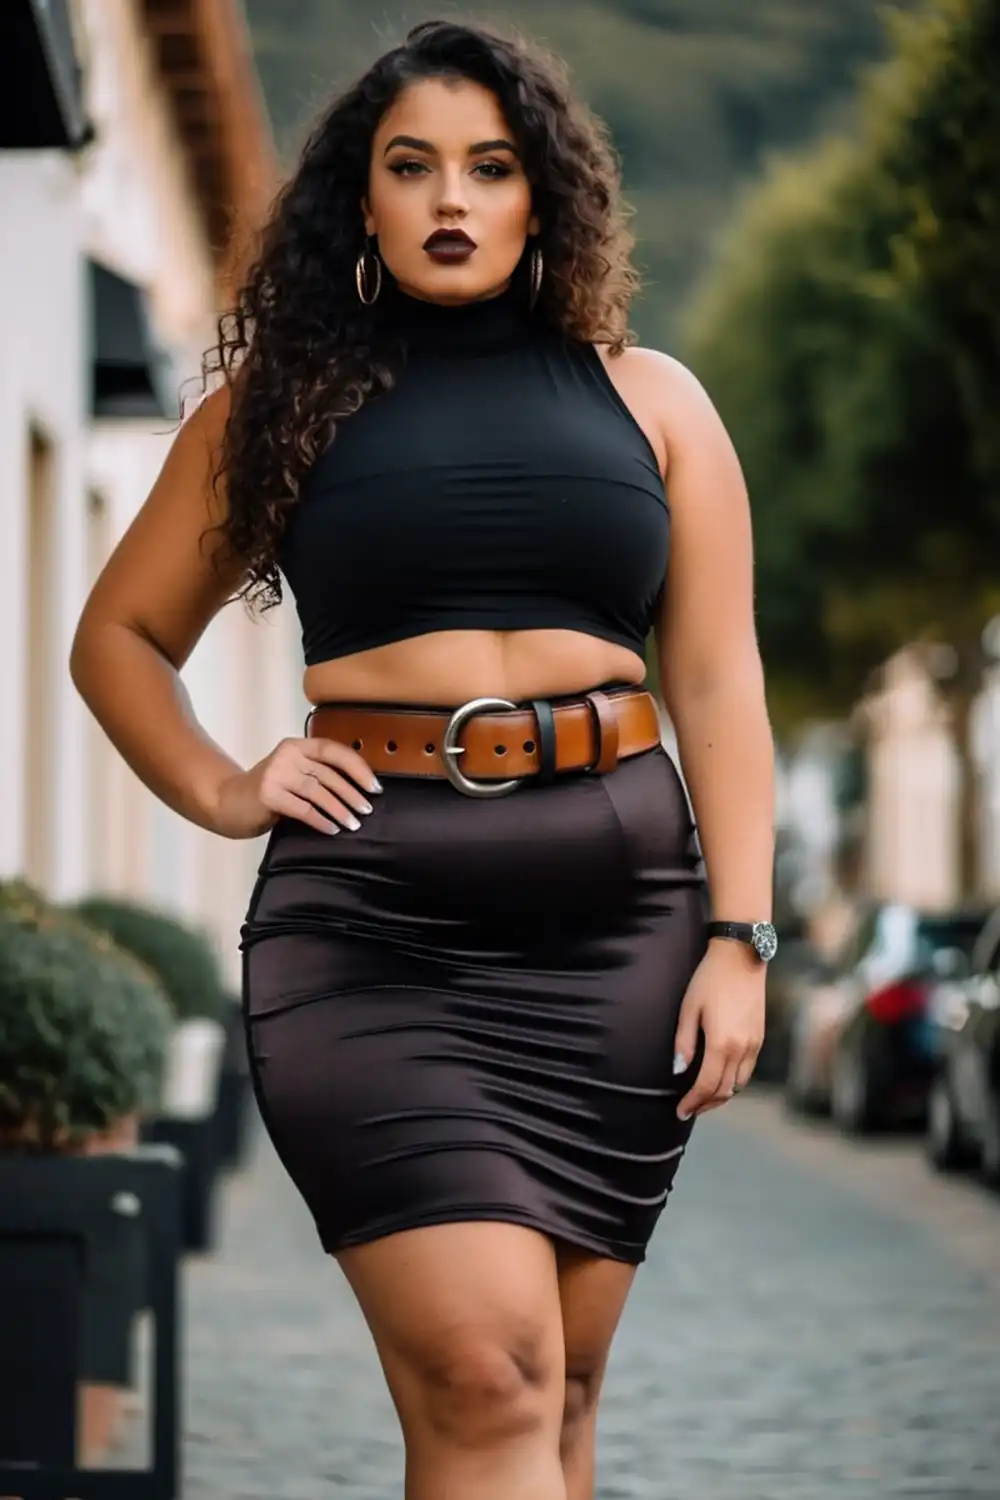 Girl wearing a black skirt with belt